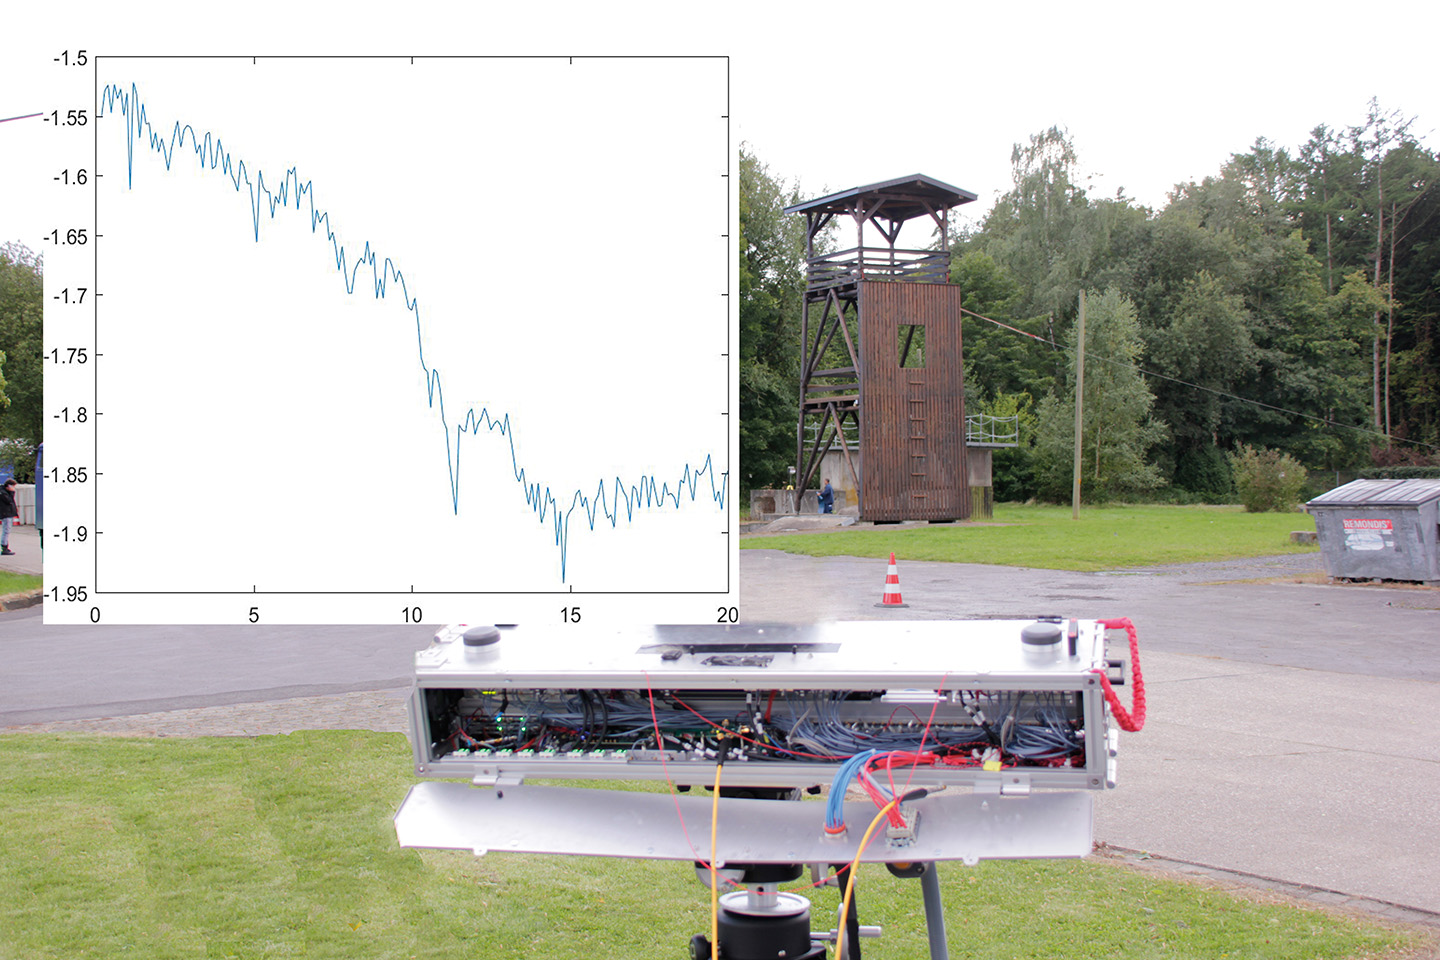 Tilting building represented by a tower being pulled with a winch. The curve shows the movement in millimeters over a 20-second period for an individual radar image point.